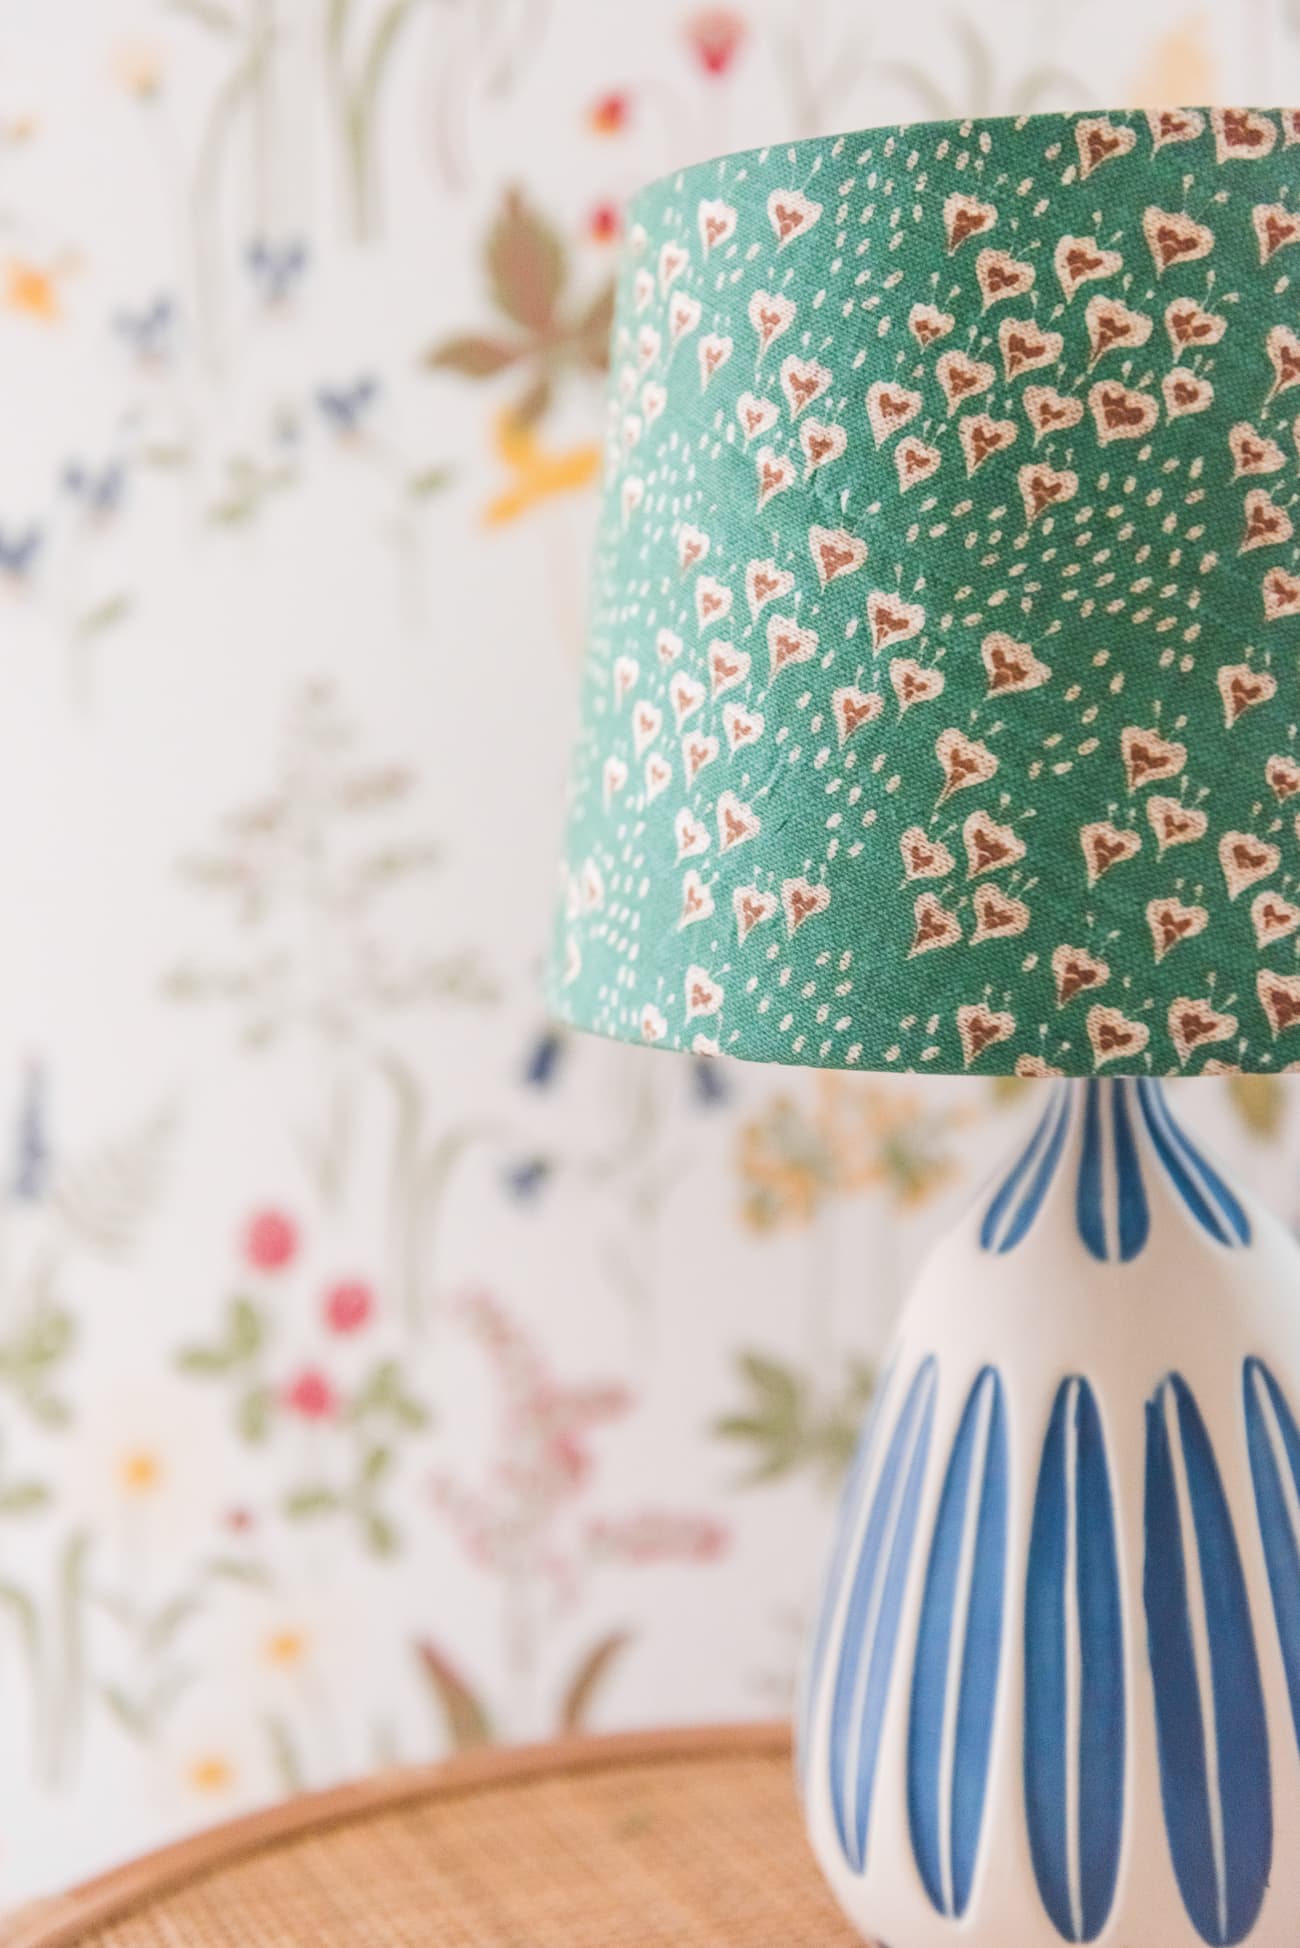 3 Diy Lampshades Made With Unexpected, How To Make A Lampshade With Material